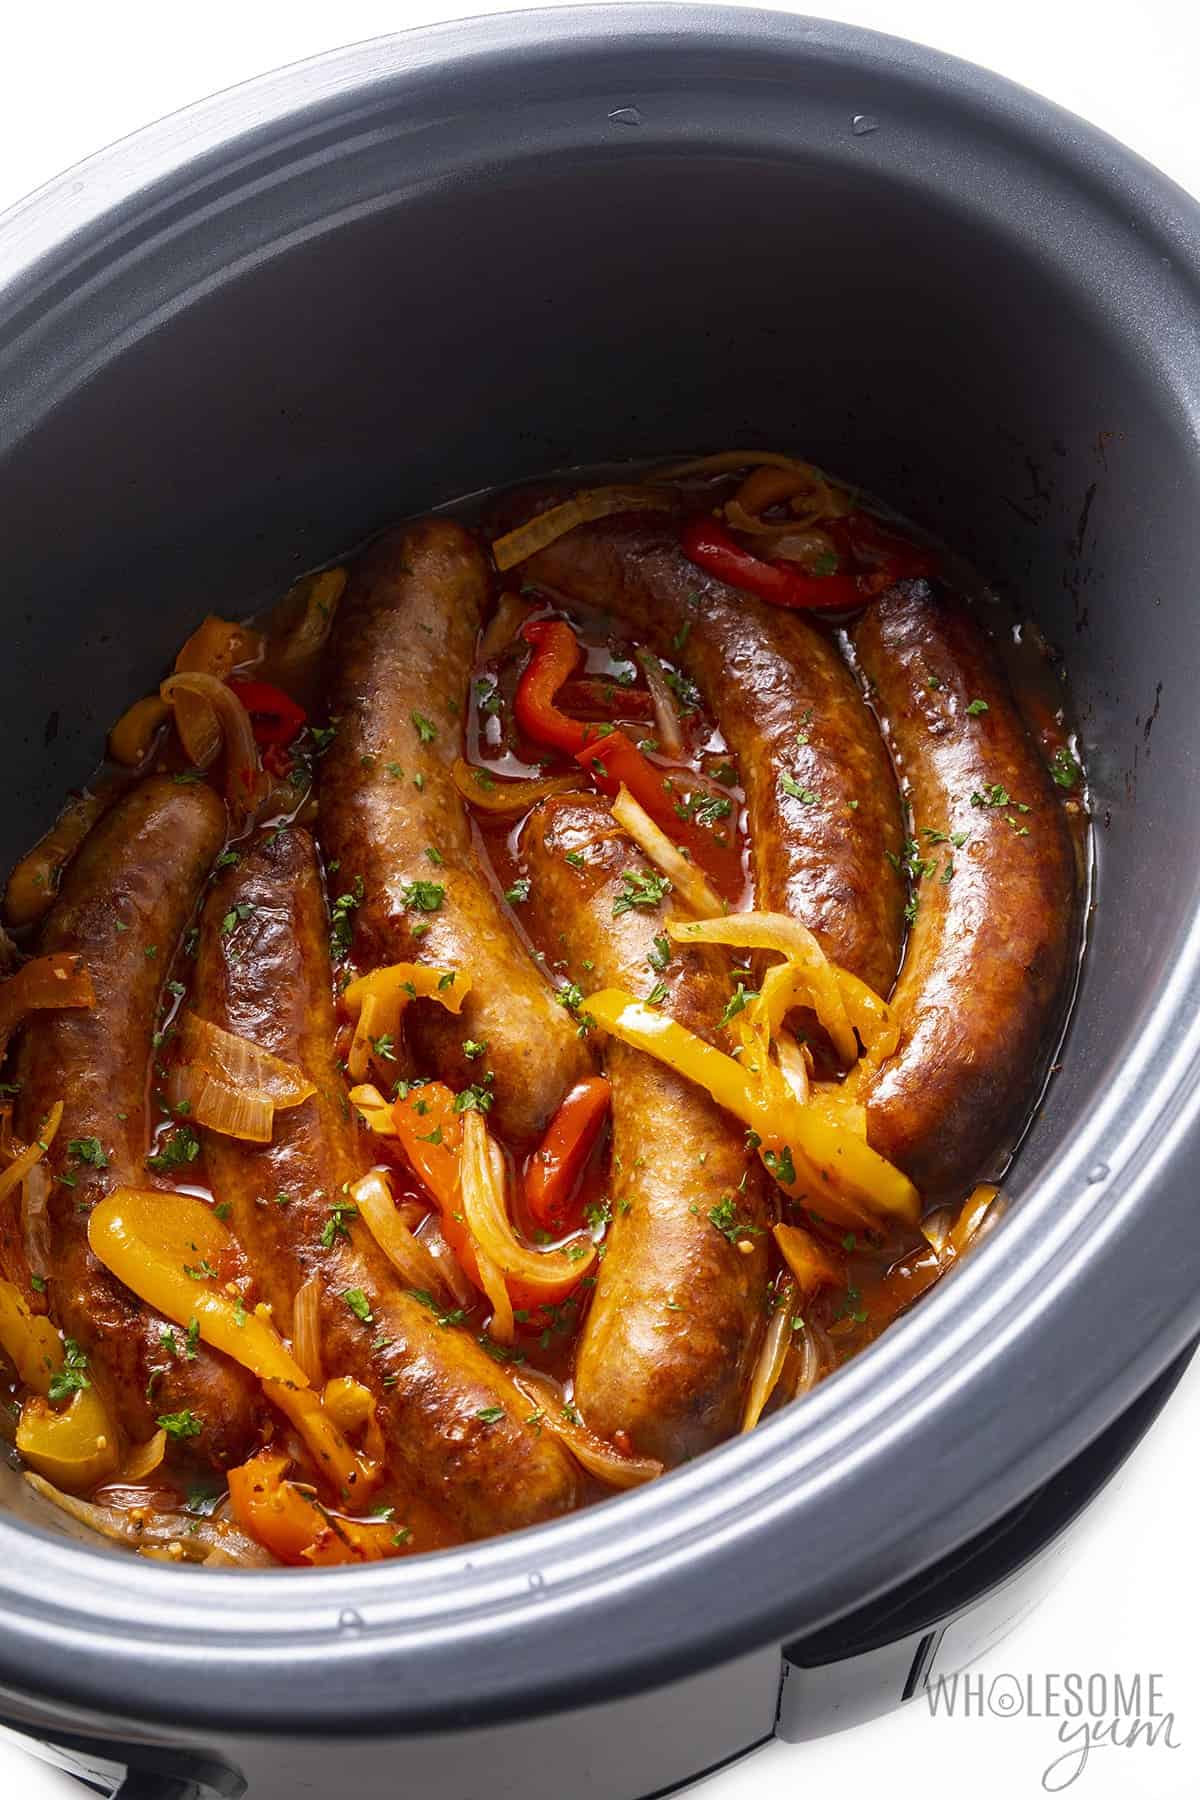 Sausage and peppers in Crock Pot.